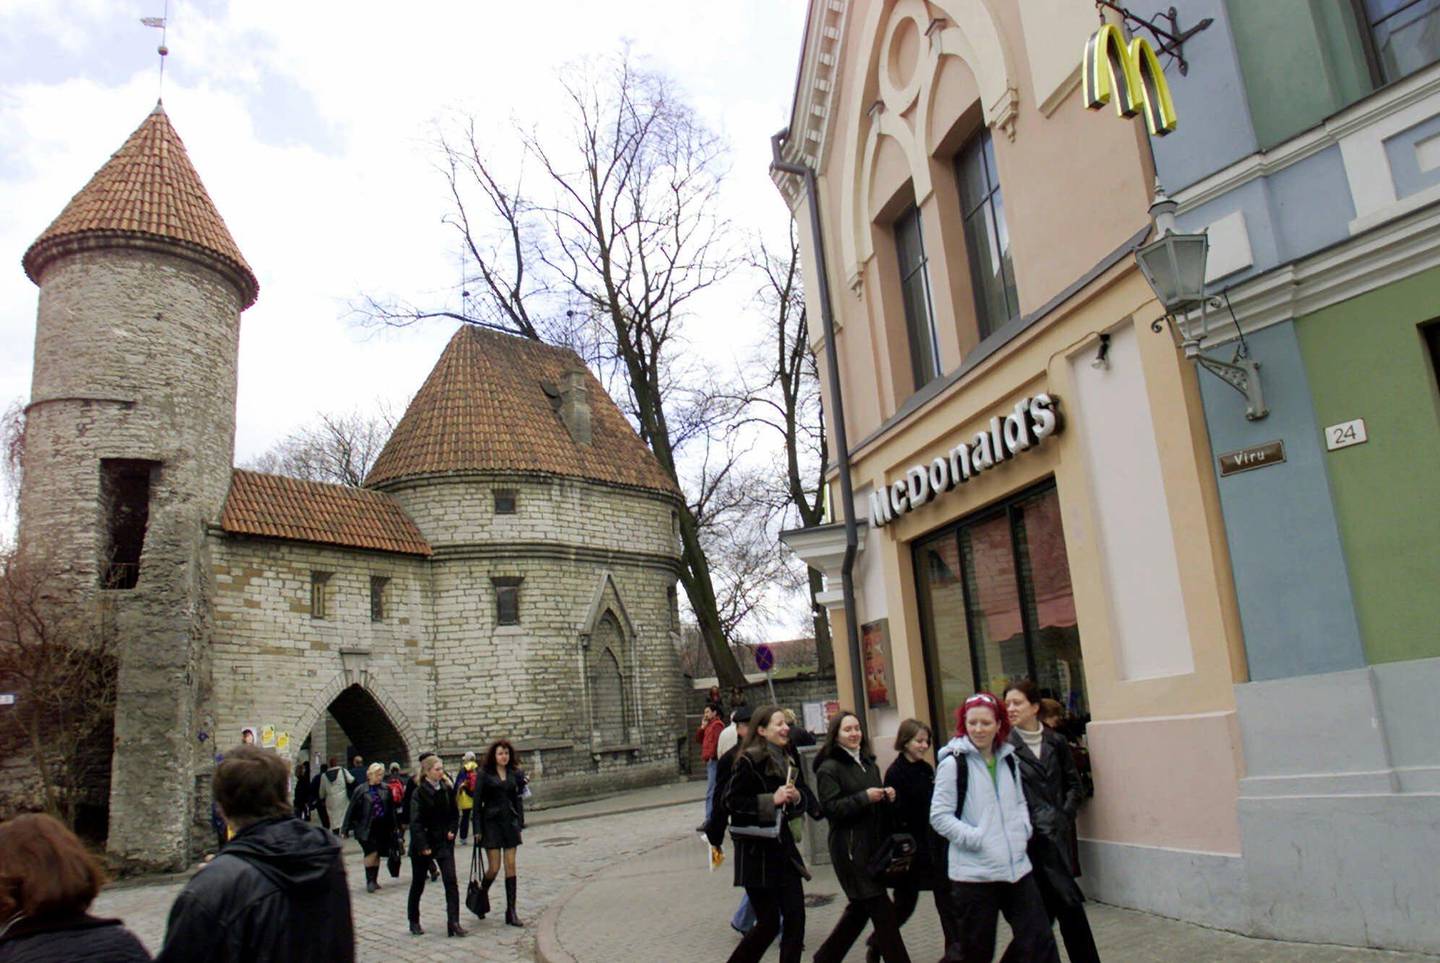 
ADVANCE FOR SUNDAY, AUG. 26--FILE--People pass a McDonalds tucked behind a medieval stone wall in Tallinn's old city, in this April 20, 2001 file photo. While many of the other 12 former Soviet states have floundered and have even elected former communists back into office, the Baltics have faced resolutely to the West and have brought an impossible dream within reach: The prospect of membership in NATO and the prosperous, borderless European Union. (AP Photo/Peeter Langovits, Postimees, File)